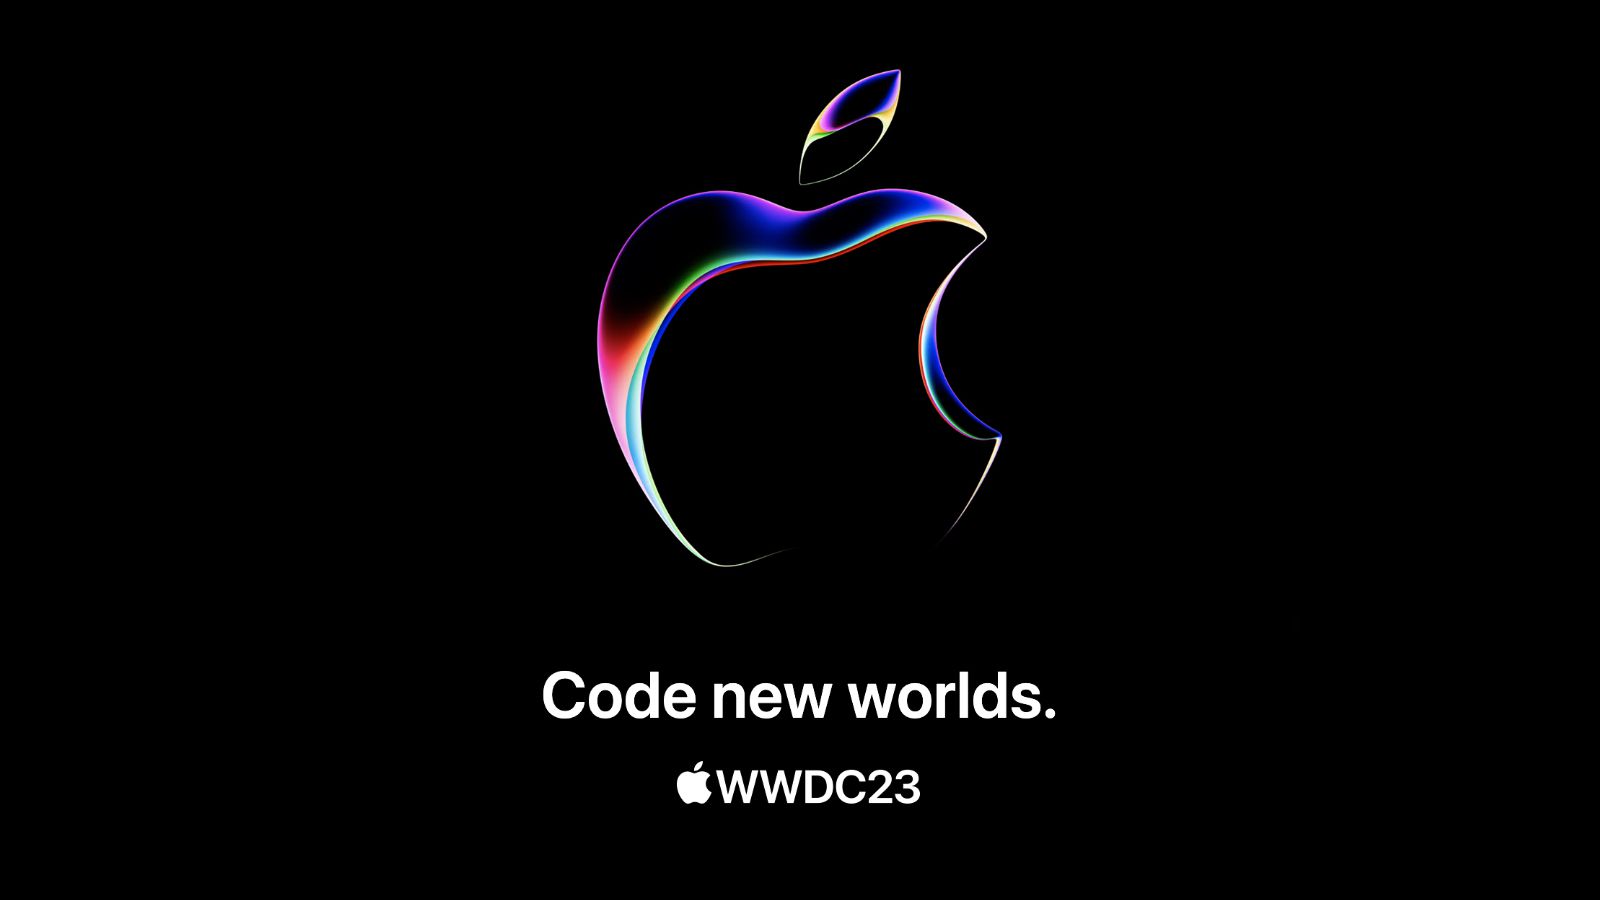 Apple Teases Dawn of a ‘New Era’ and Coding ‘New Worlds’ at WWDC